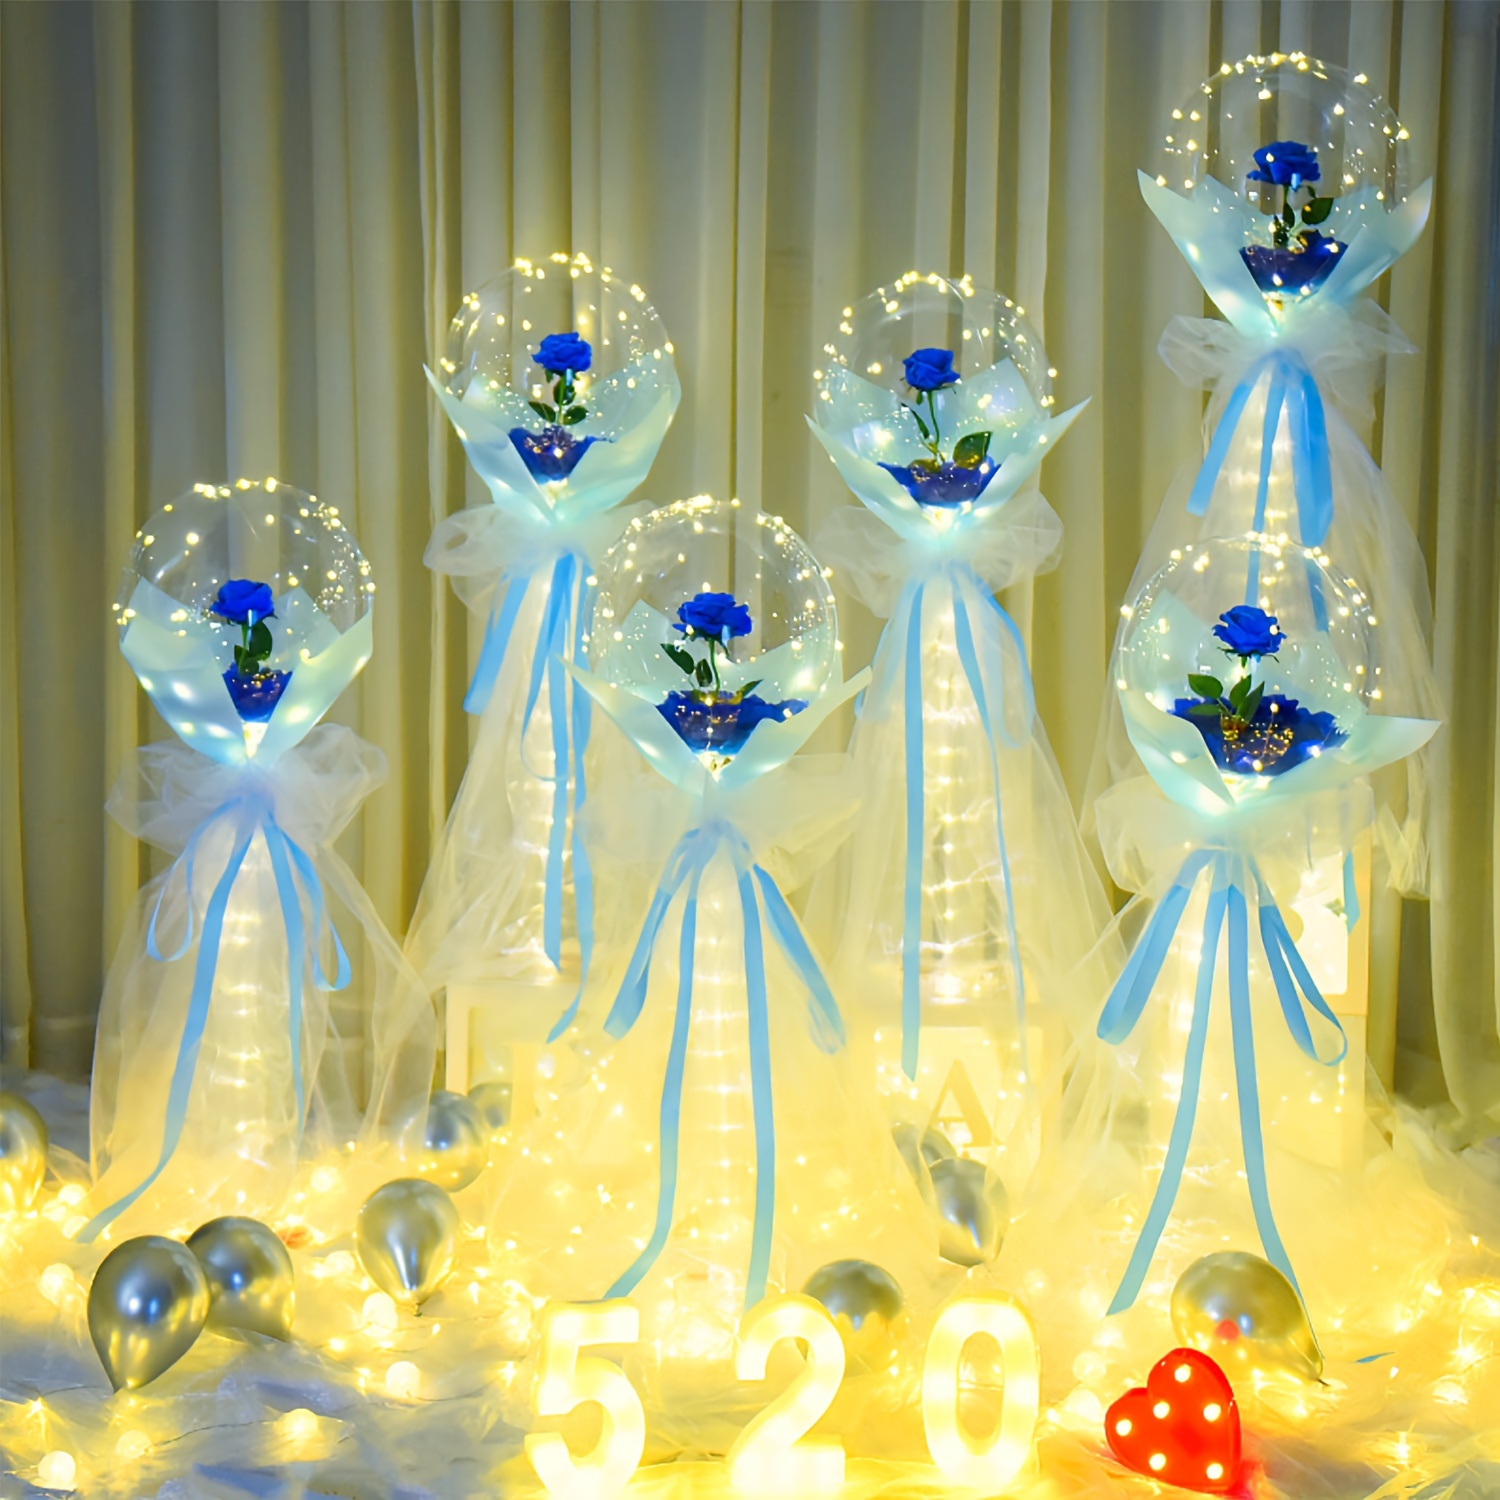 

2pcs Led String Lights Glow Transparent Balloons With Blue Rose For Birthday Wedding Valentine's Day Anniversary